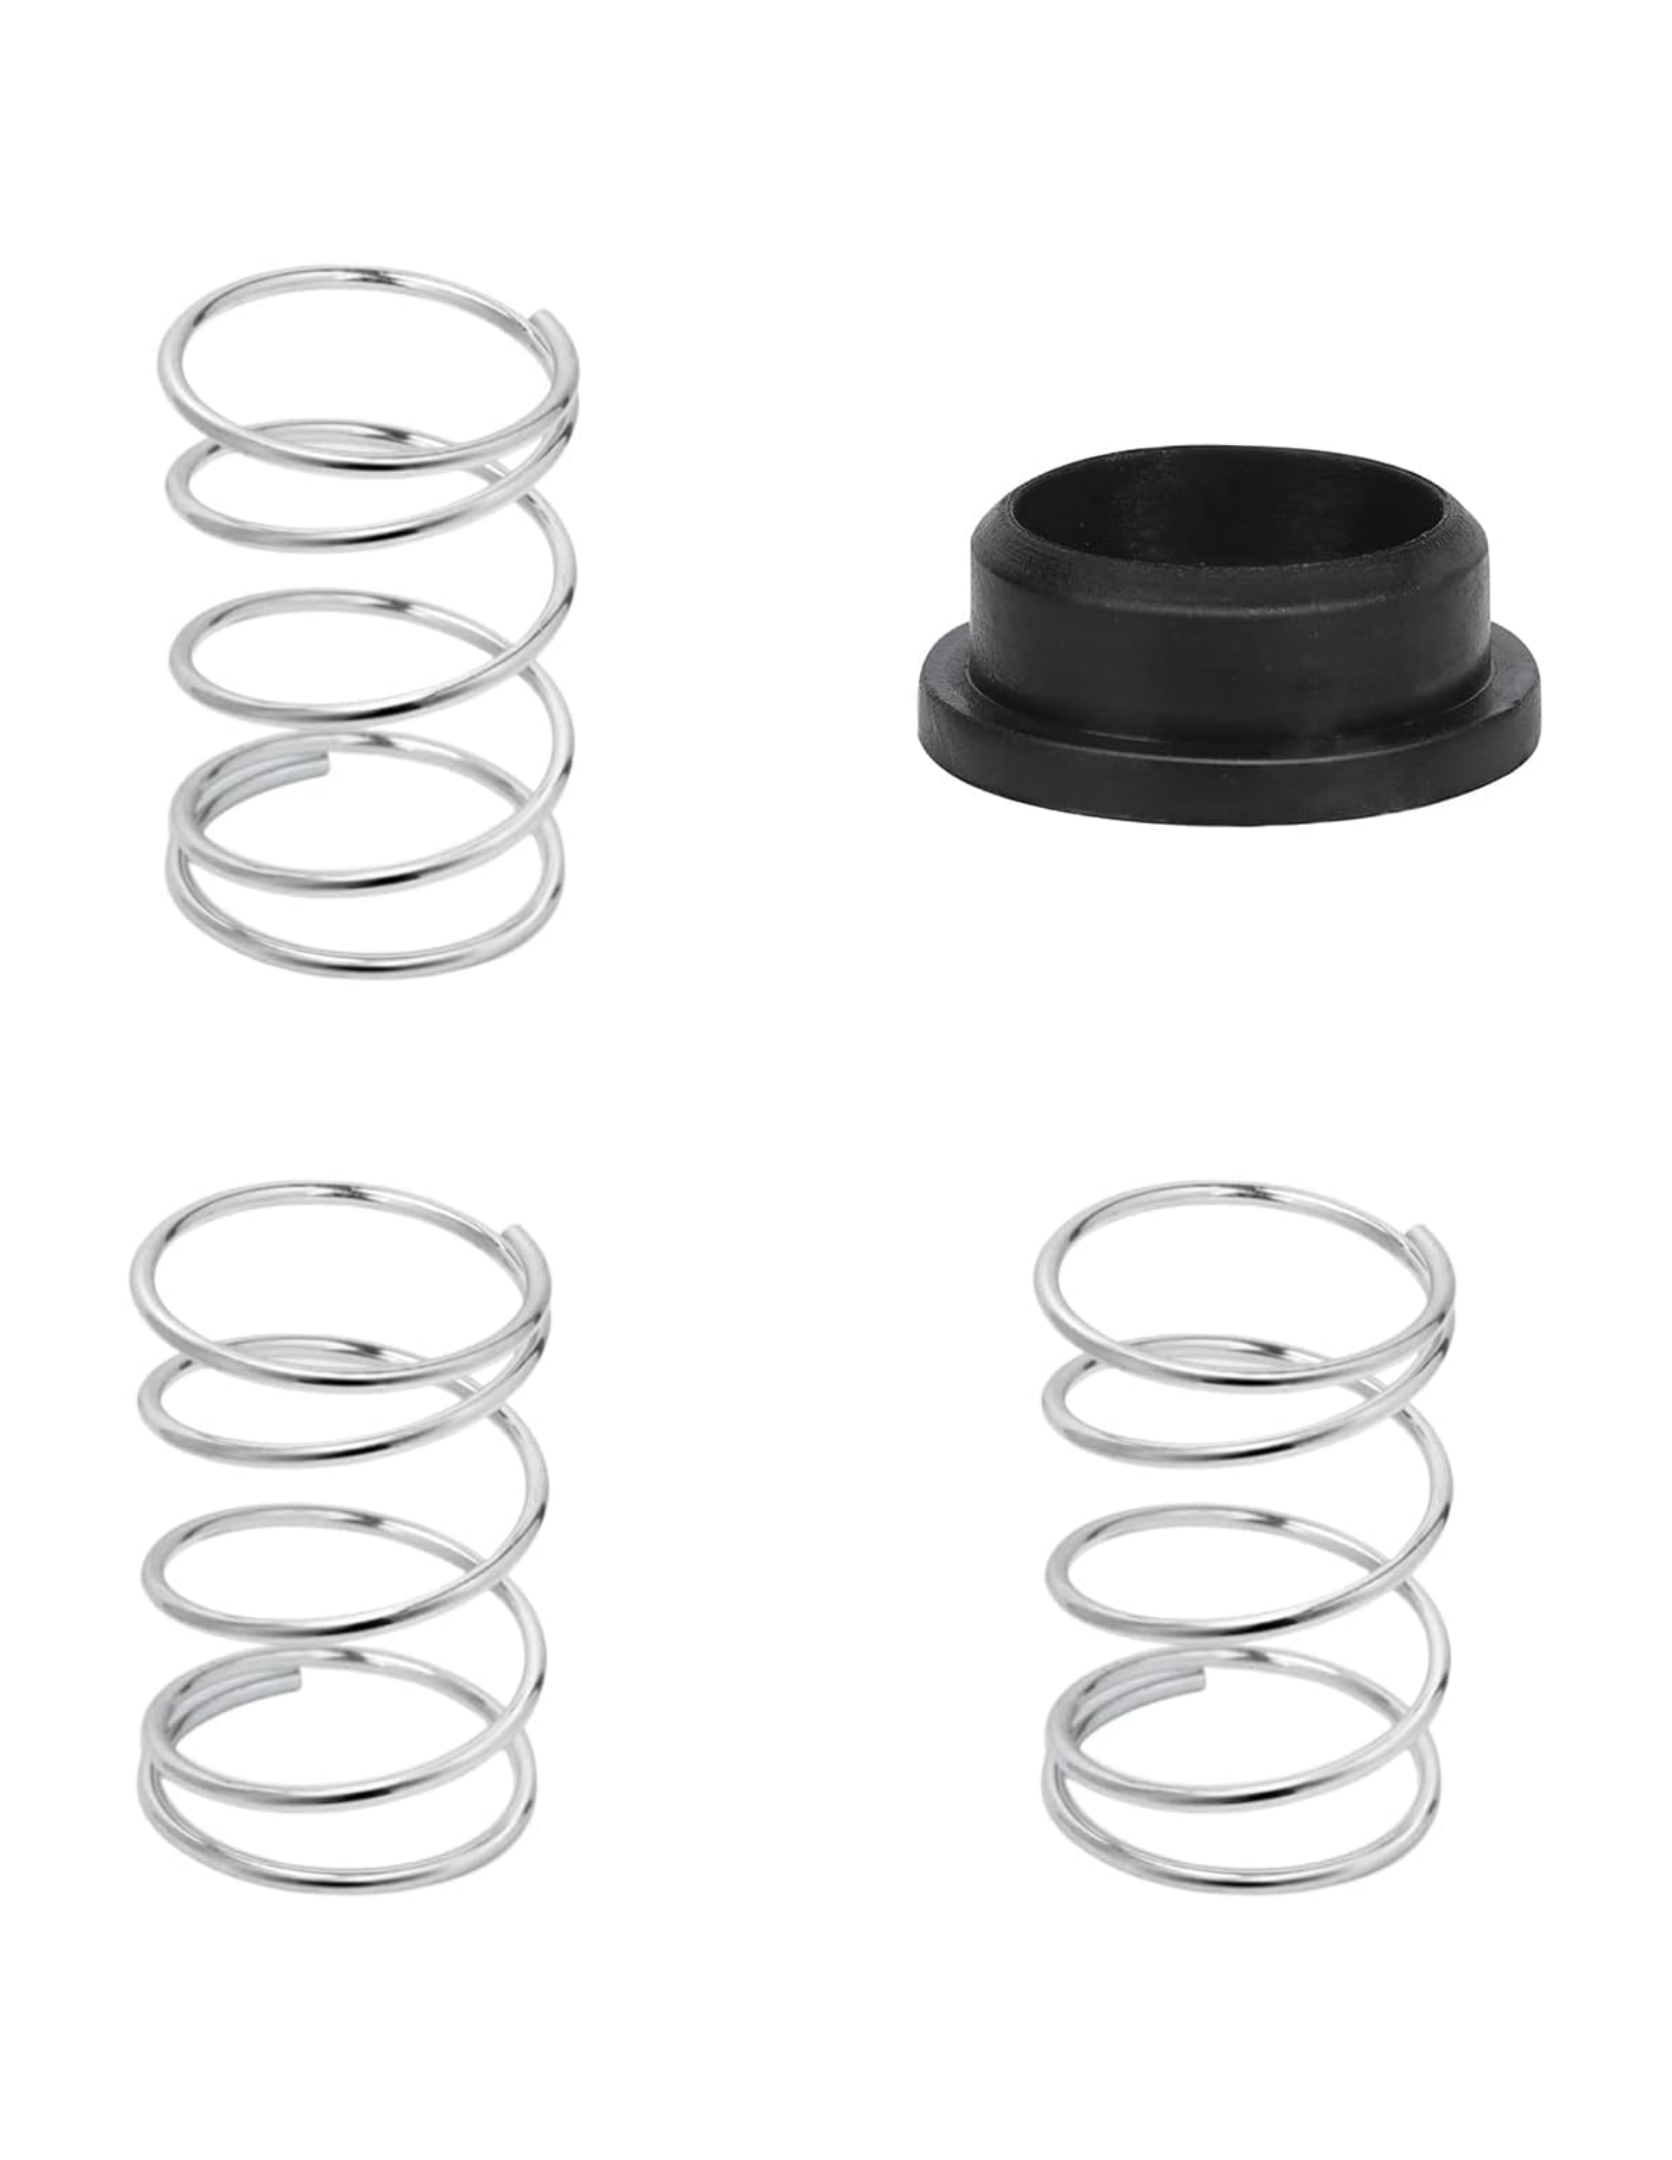 THTEN DWO1DT995 Replacement Spring Base Compatible with Dewalt DCST970,DCST922,DCST990,DCST920,DCST925,DCST991 Cordless String Trimmer 4 Pack